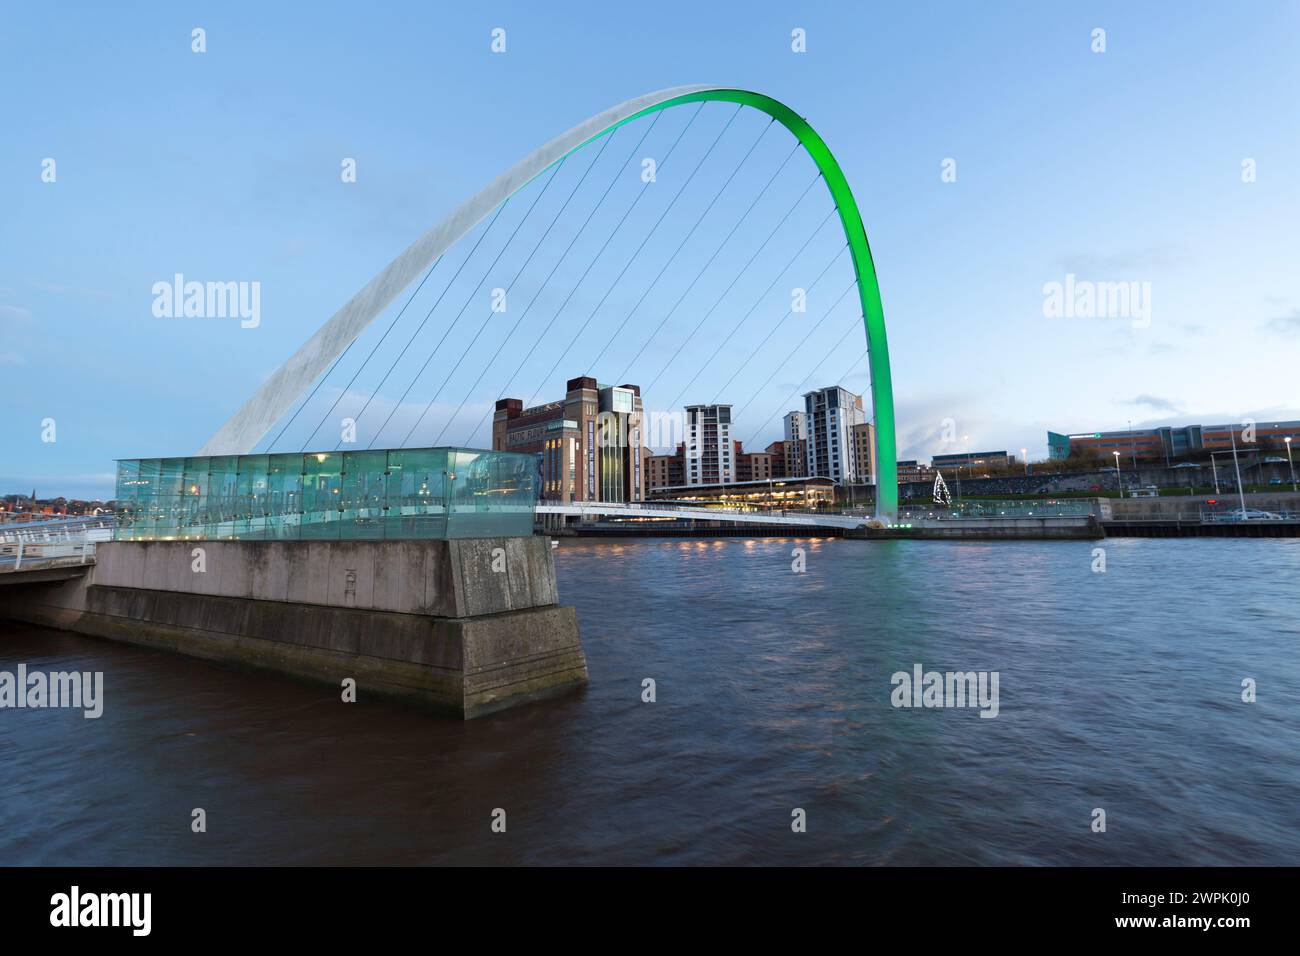 UK, Newcastle upon Tyne, the Gateshead Millennium Bridge over the river Tyne and the Baltic Centre for Ceontemporary Art. Stock Photo